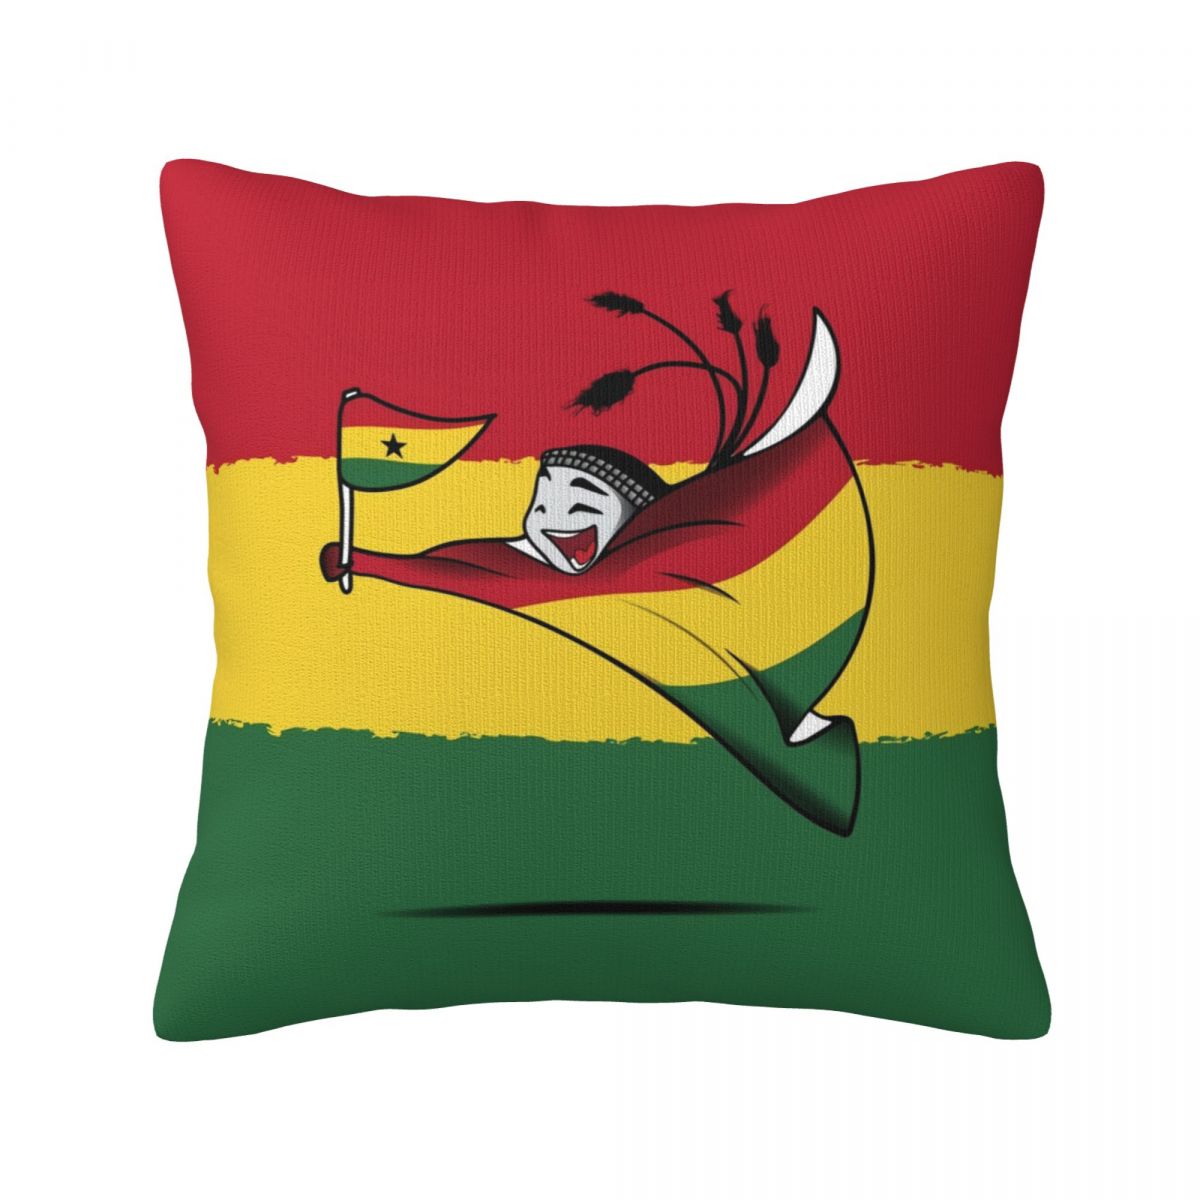 Ghana World Cup 2022 Mascot Pillow Covers 18x18 Inch